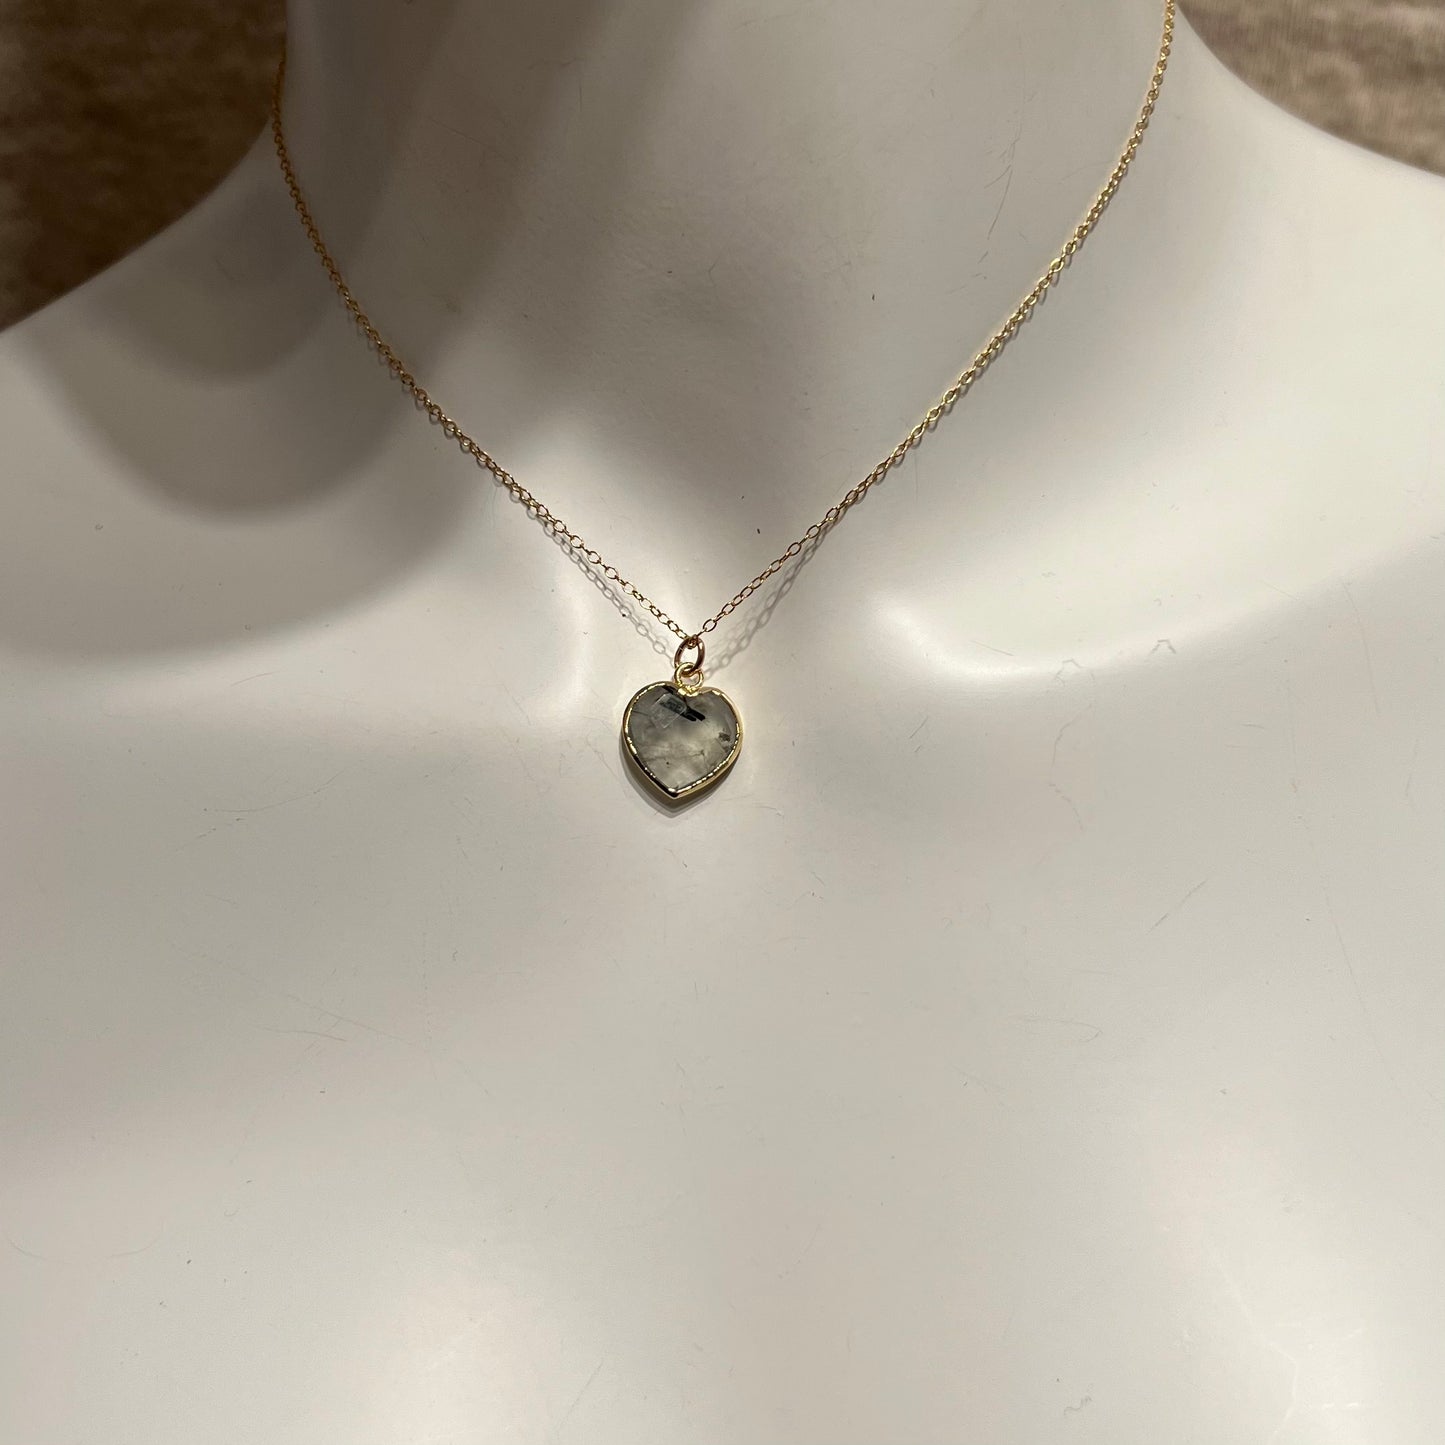 Stone Cooper facet heart necklace